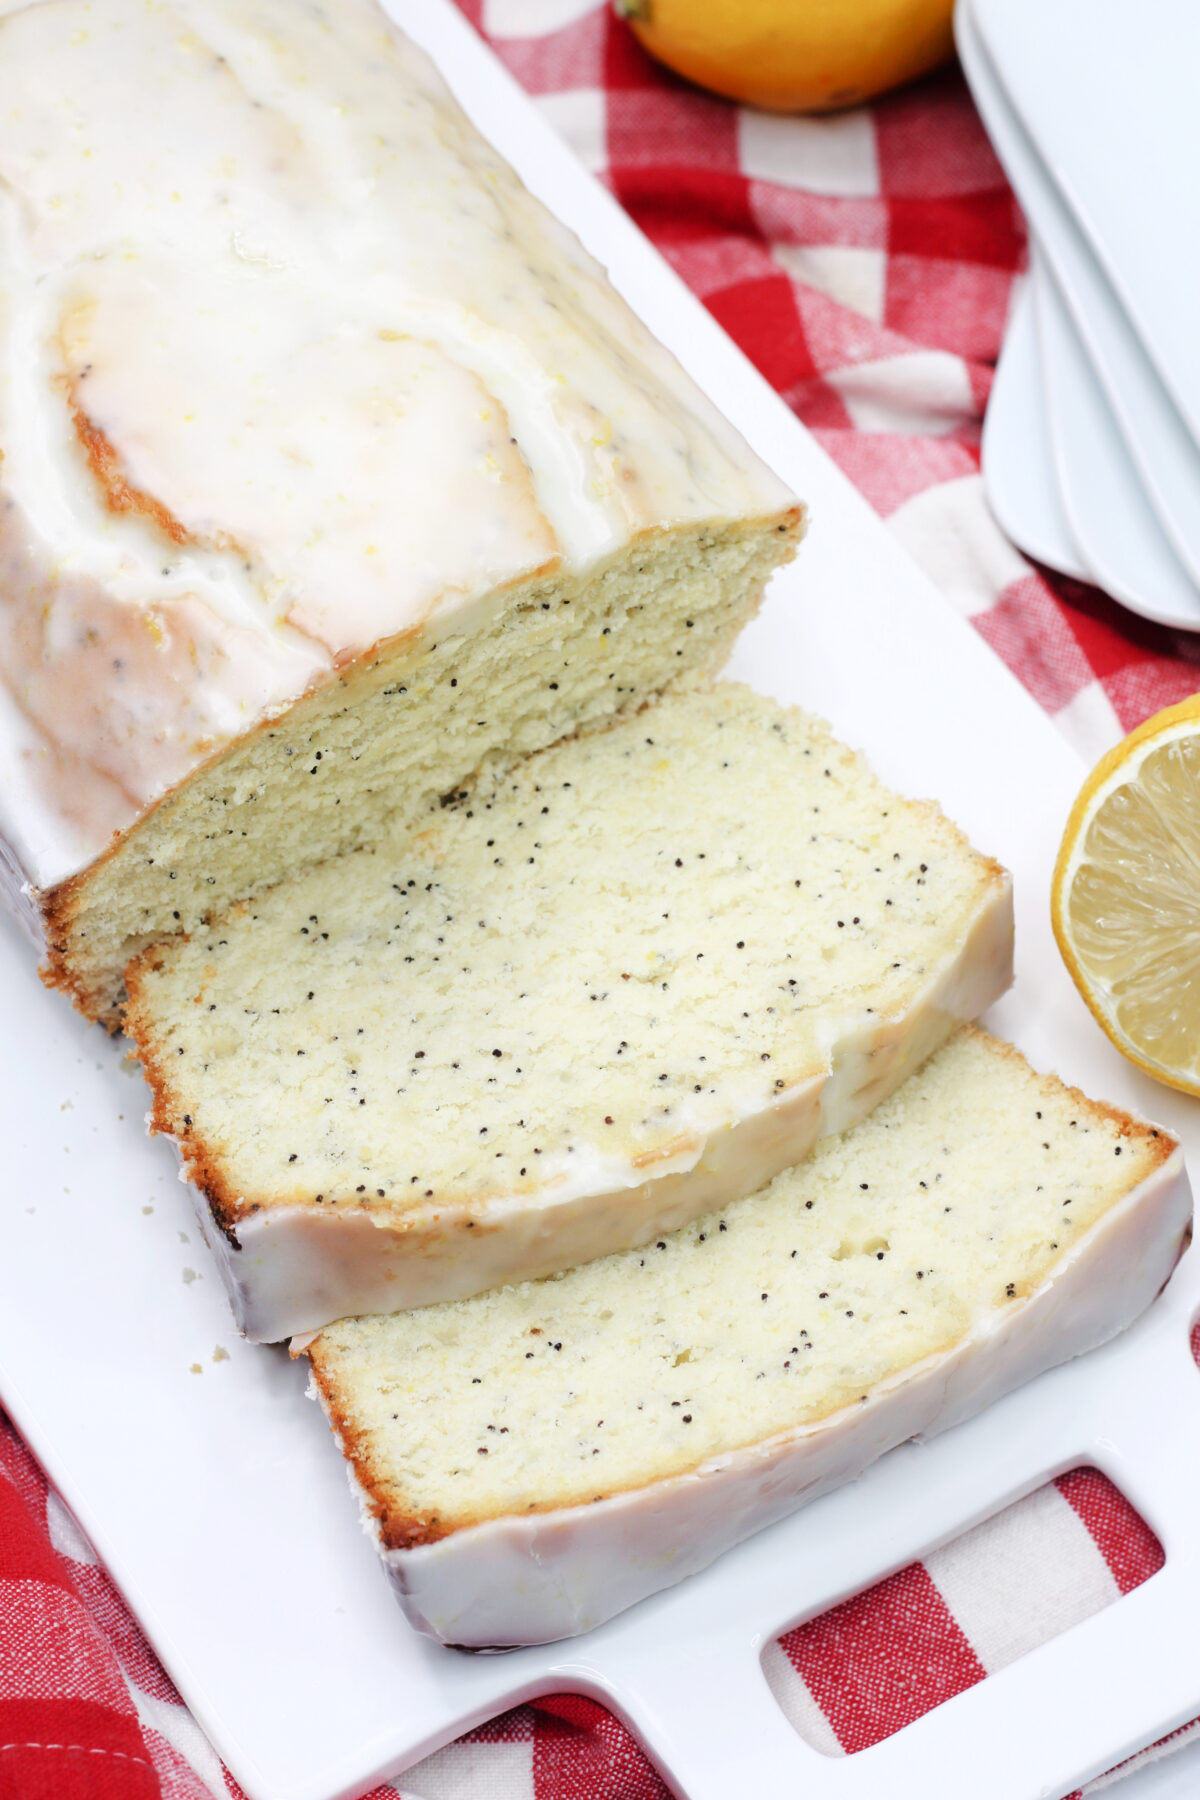 This quick and easy lemon poppy seed bread recipe is so good, it's the perfect blend of sweet and tangy with a moist and tender crumb.